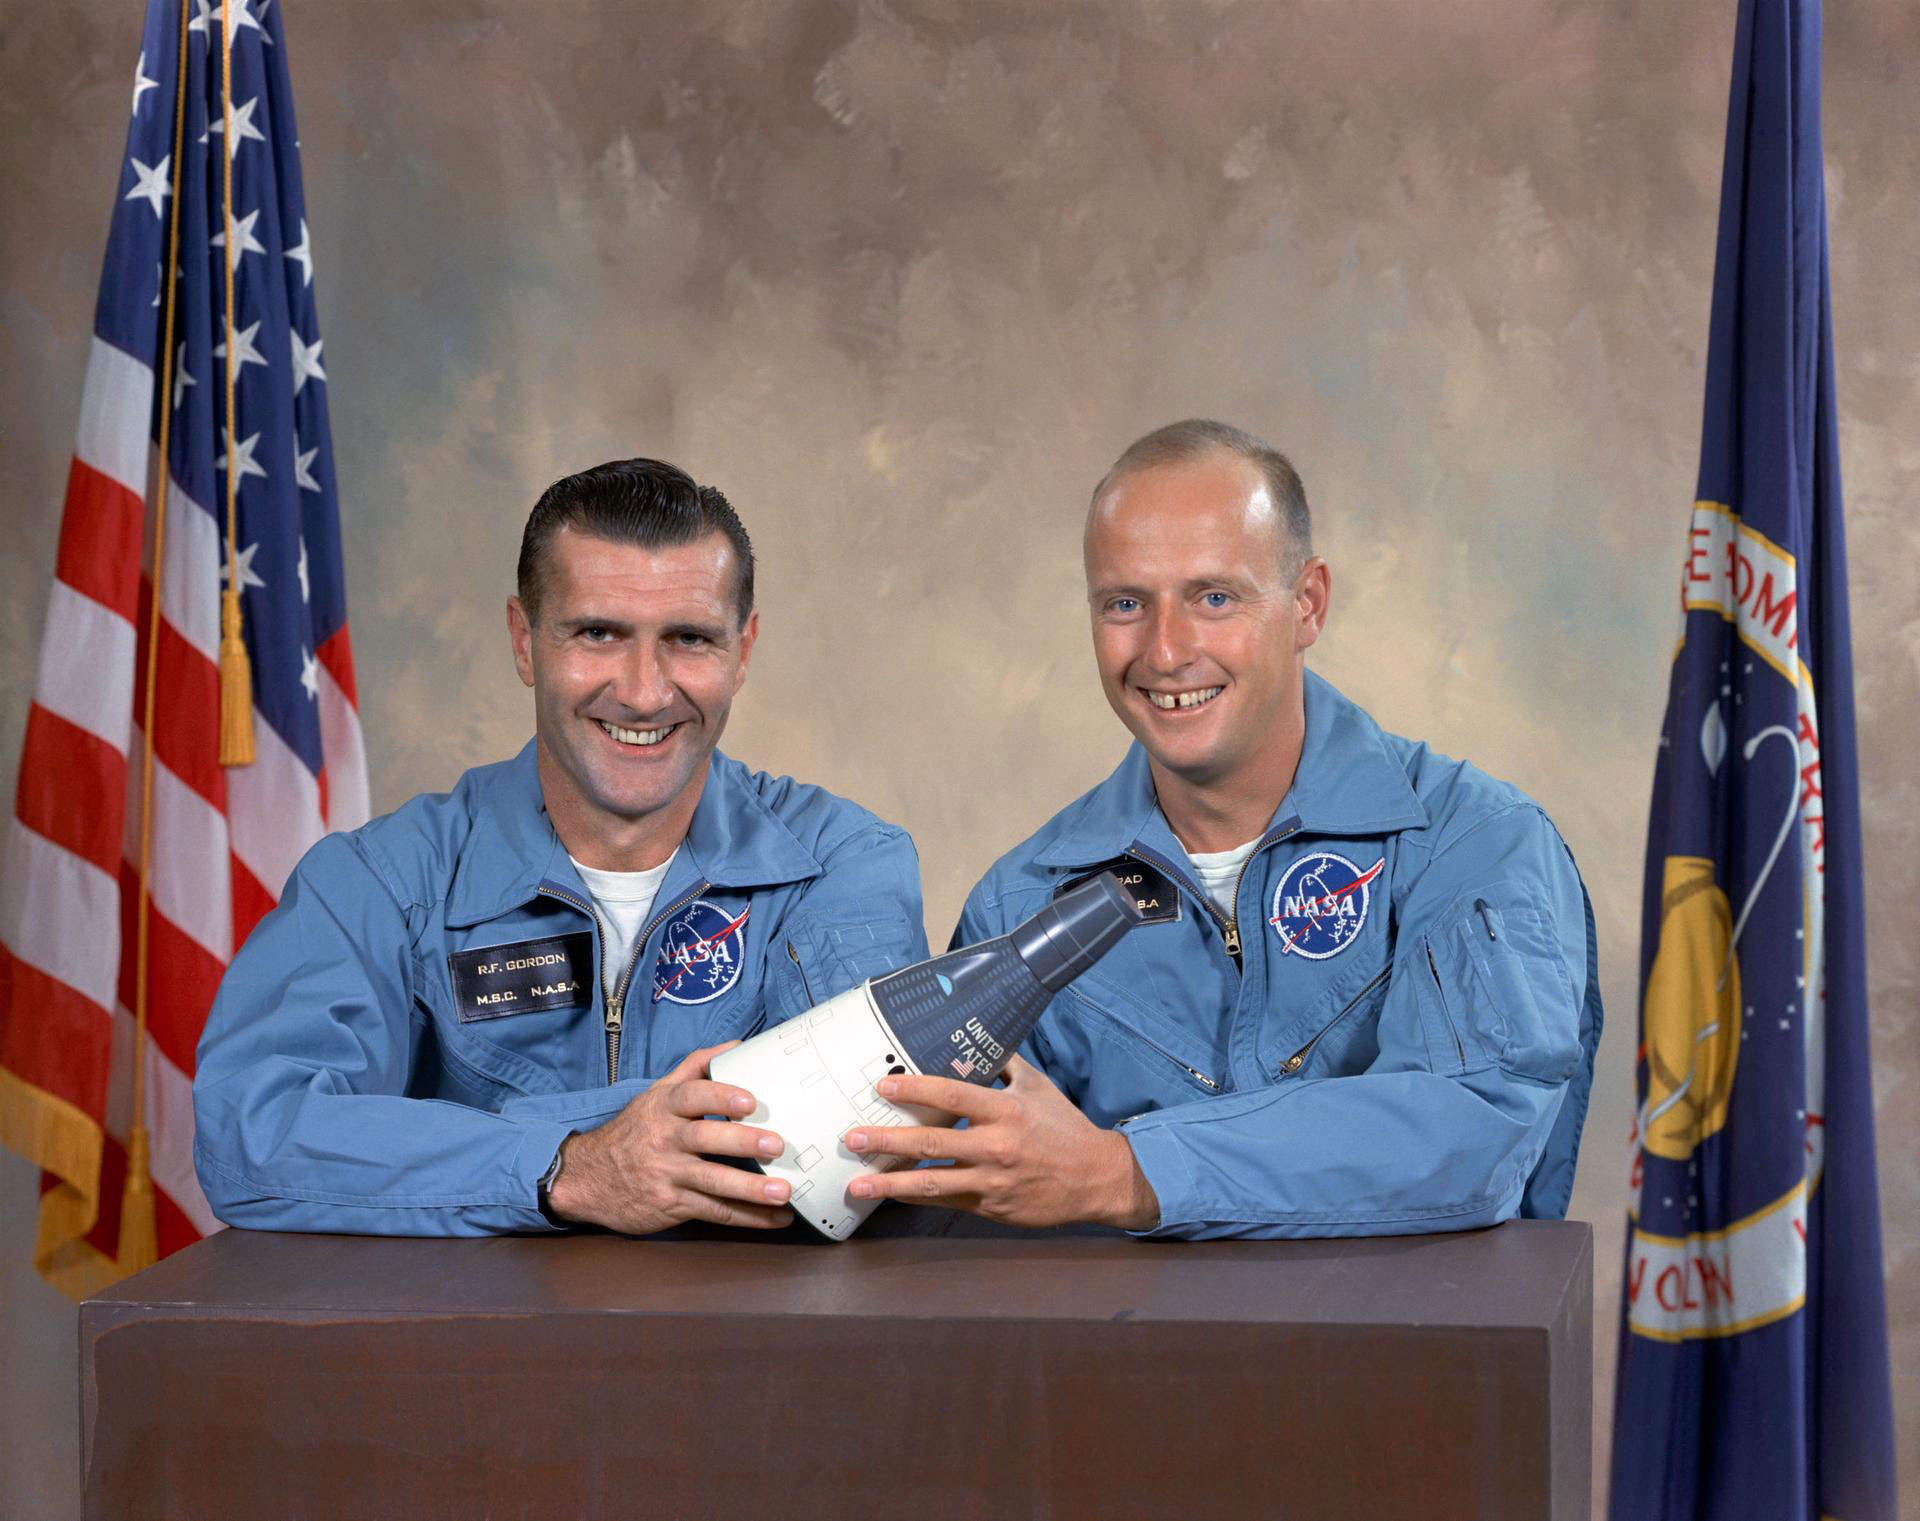 Two men pose for a photo holding a small spacecraft replica